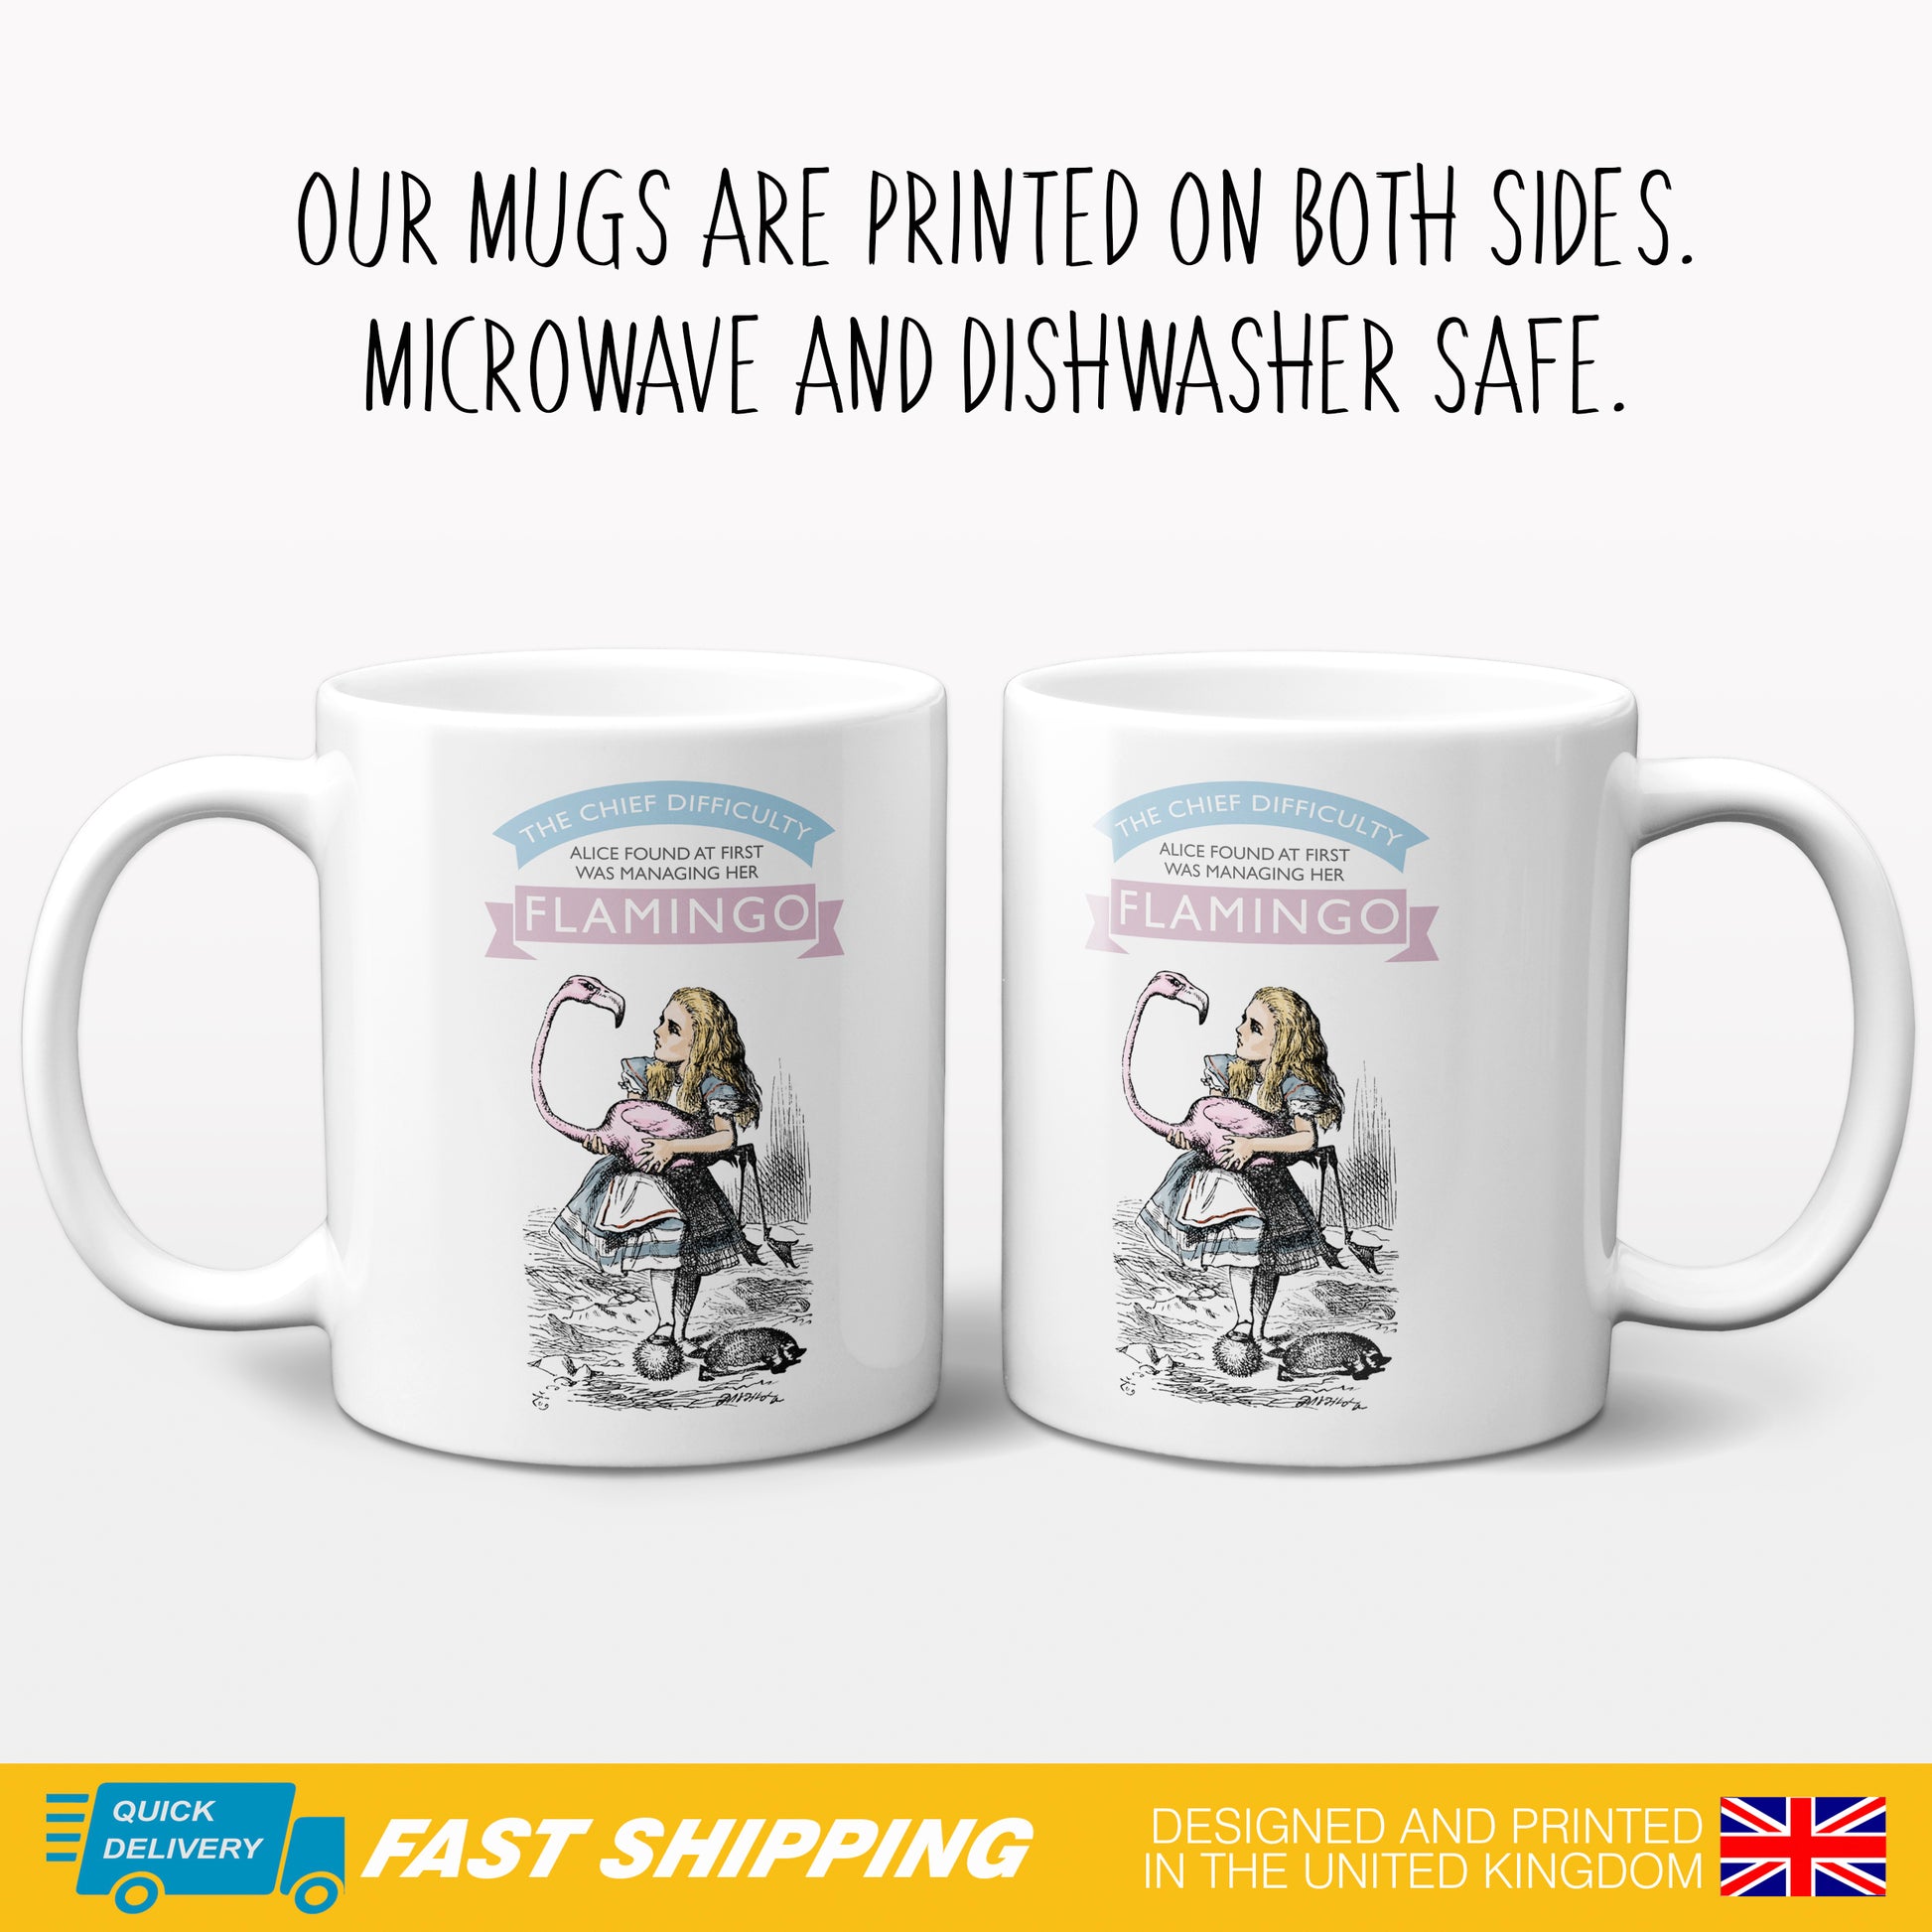 Alice in Wonderland Gift Mug depicting Alice holding a Flamingo and the Phrase 'The chief difficulty Alice found at first was managing her Flamingo' showing 2 mugs with front and back artwork